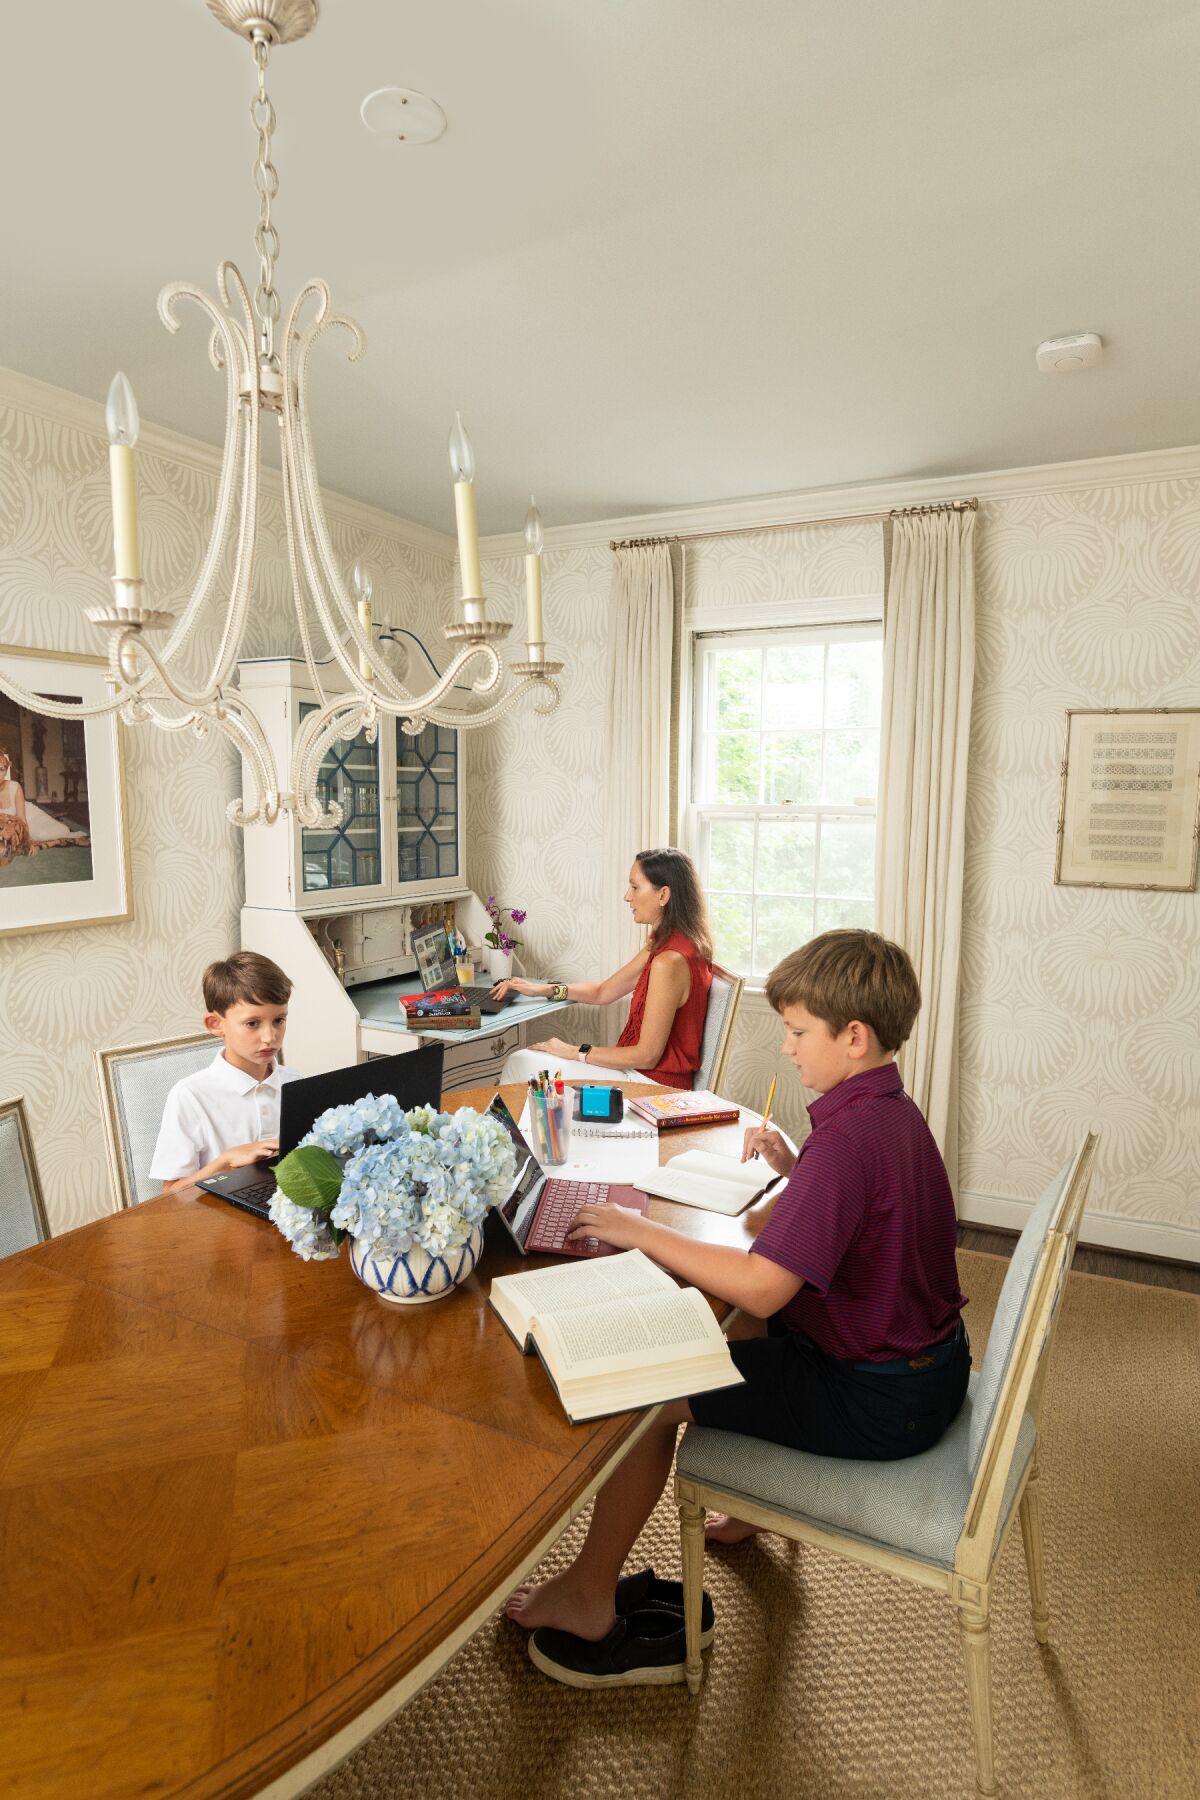 A mom works at a desk in the corner of the dining room while her two sons work on schoolwork at the table.